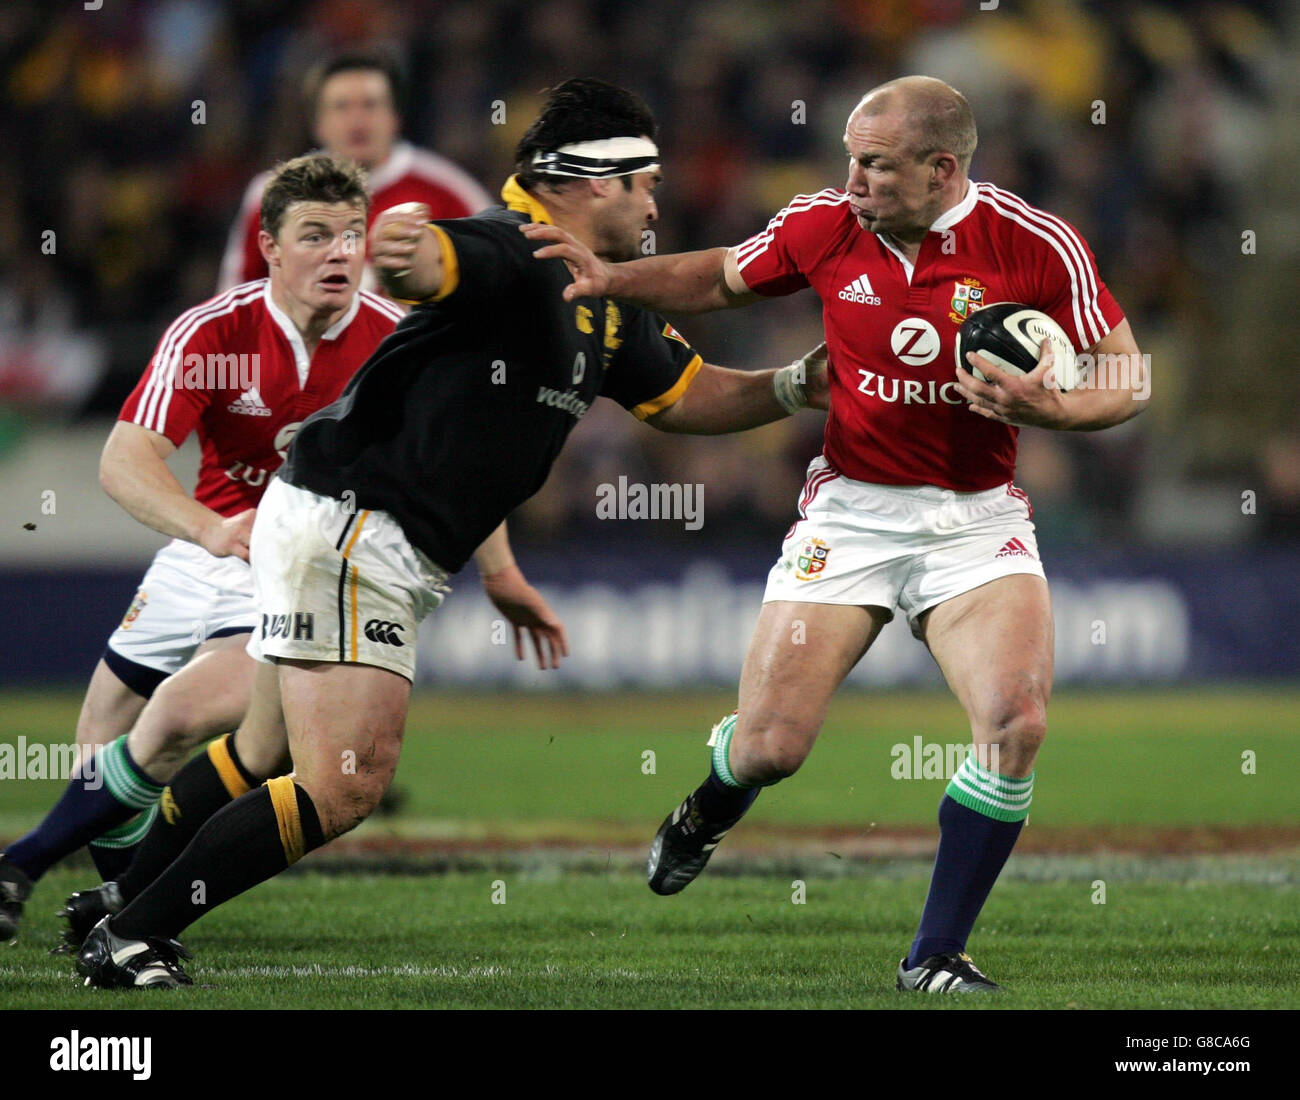 Rugby Union - British & Irish Lions Tour - Wellington v British & Irish Lions - Westpac Stadium. British and Irish Lions' Neil Back (R) hands off the tackle of Wellington's Joe McDonnell. Stock Photo